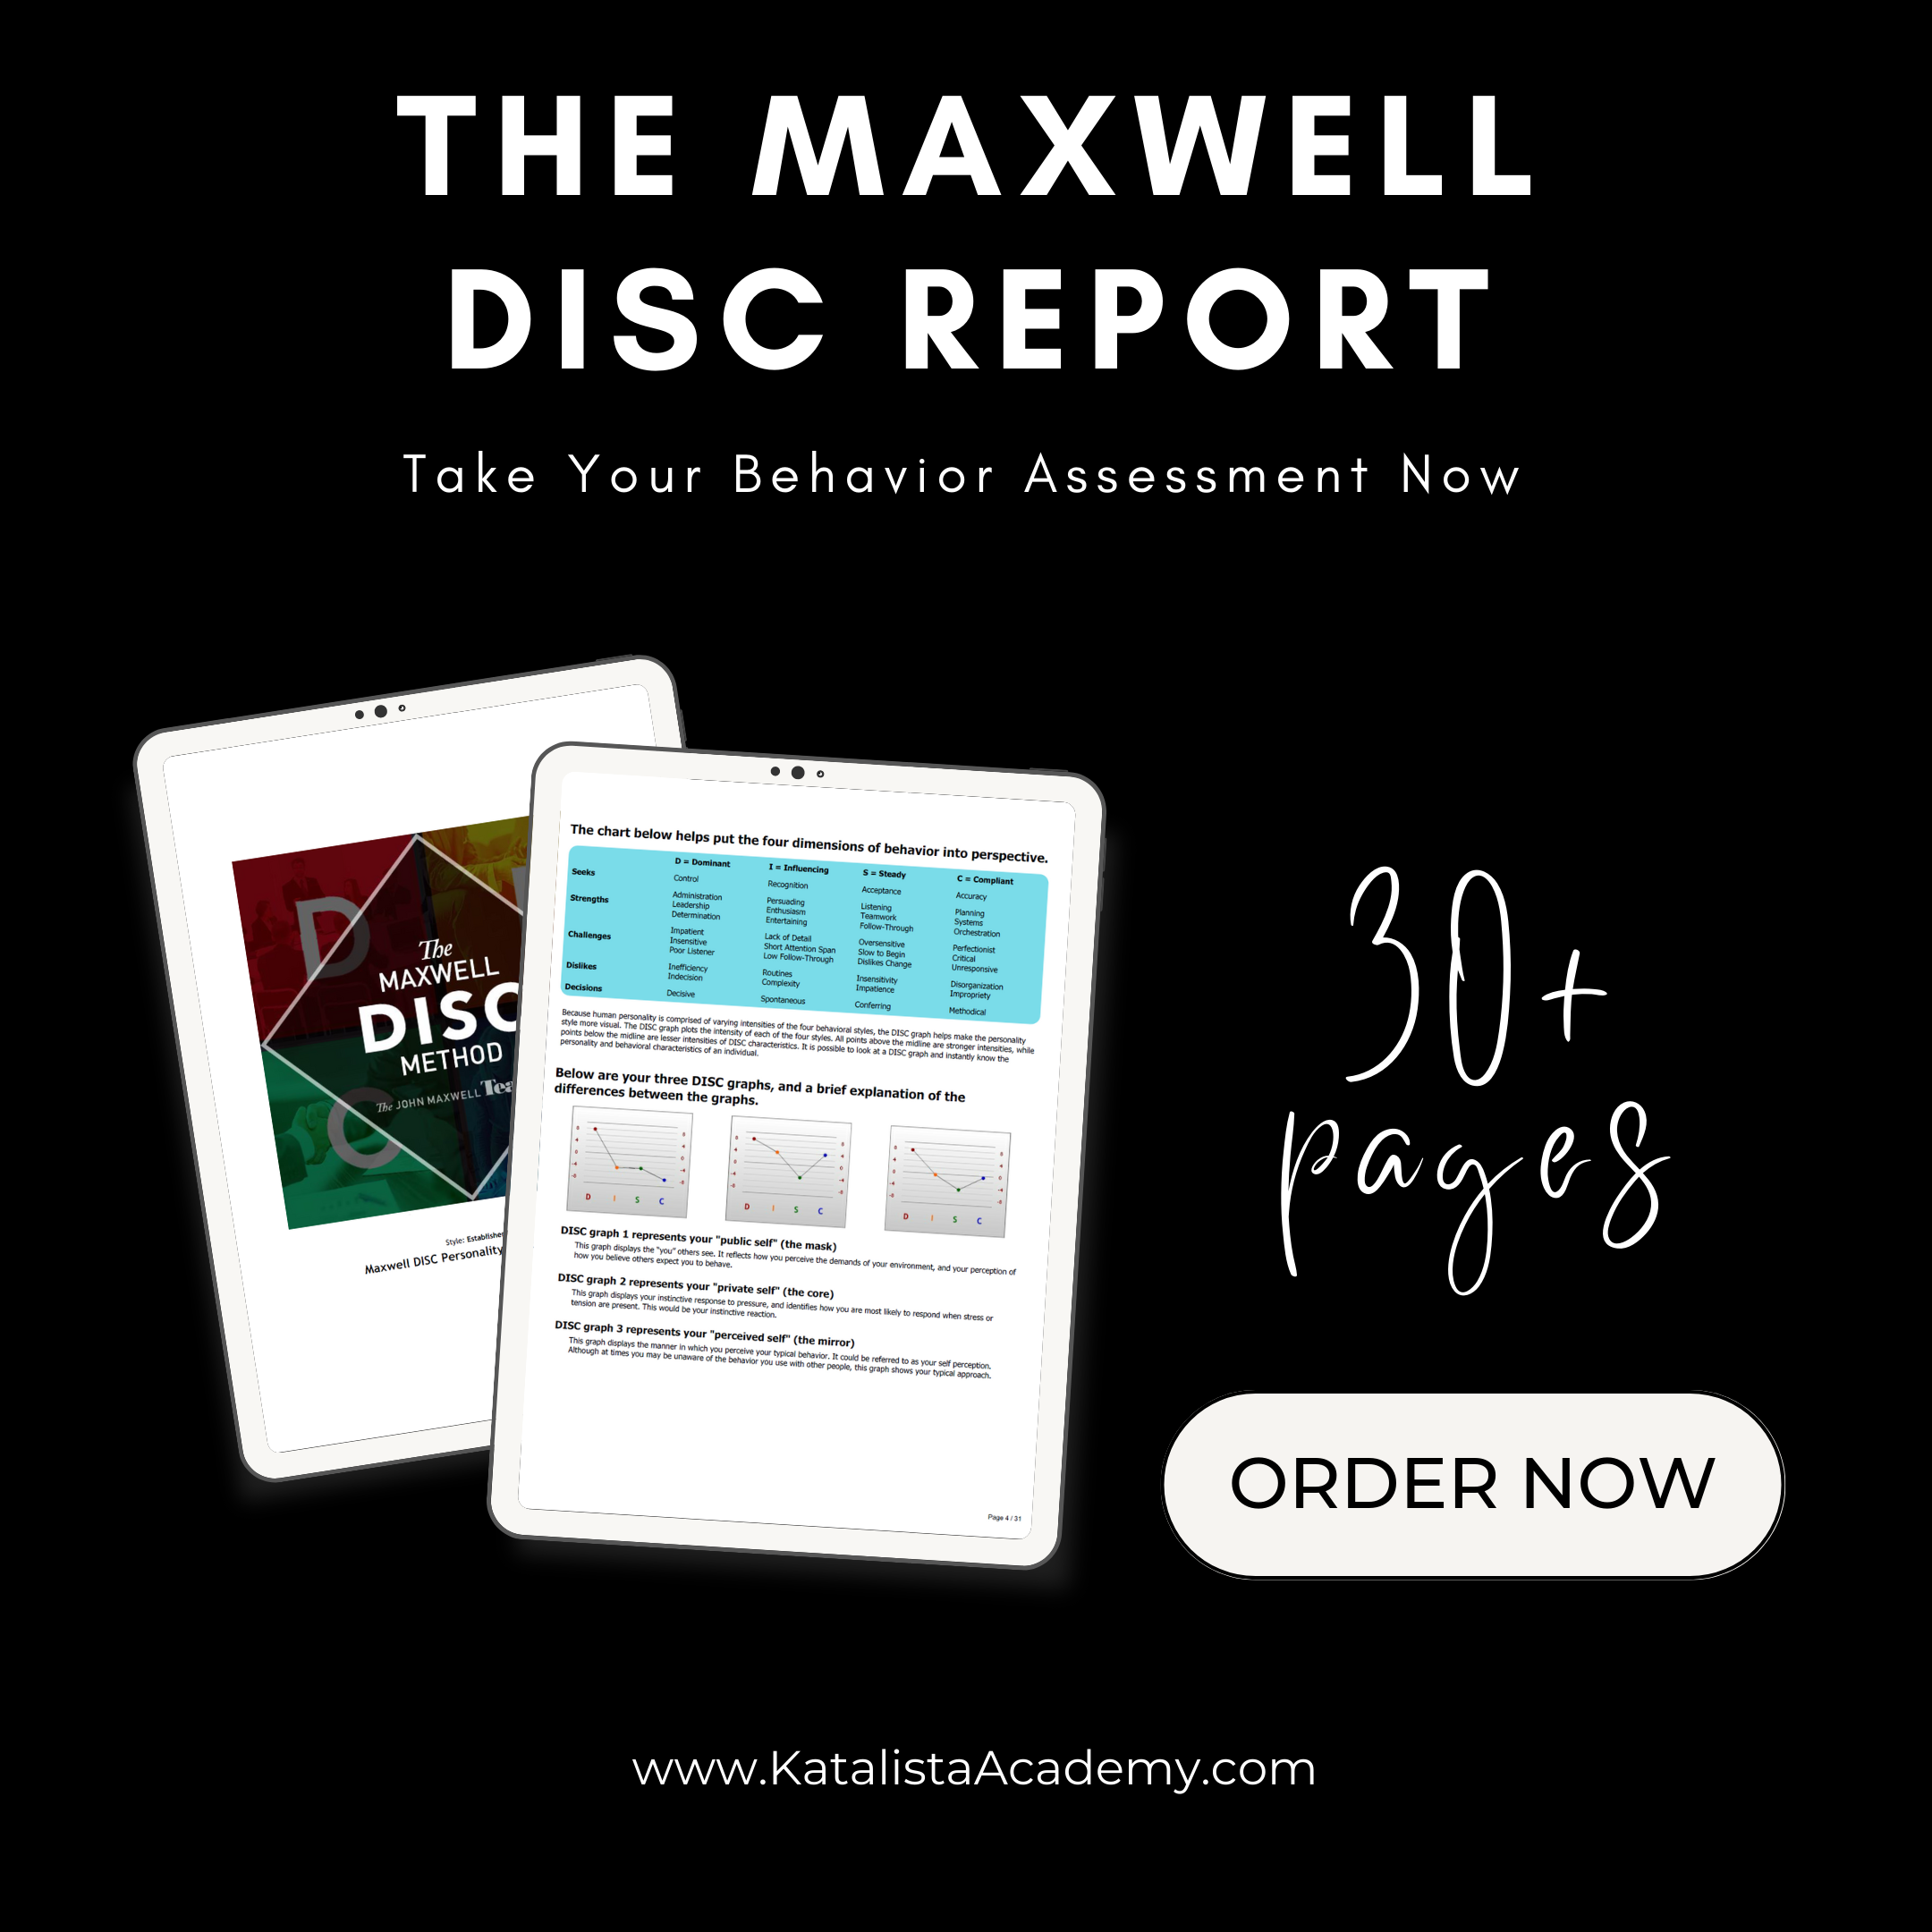 The maxwell disc report